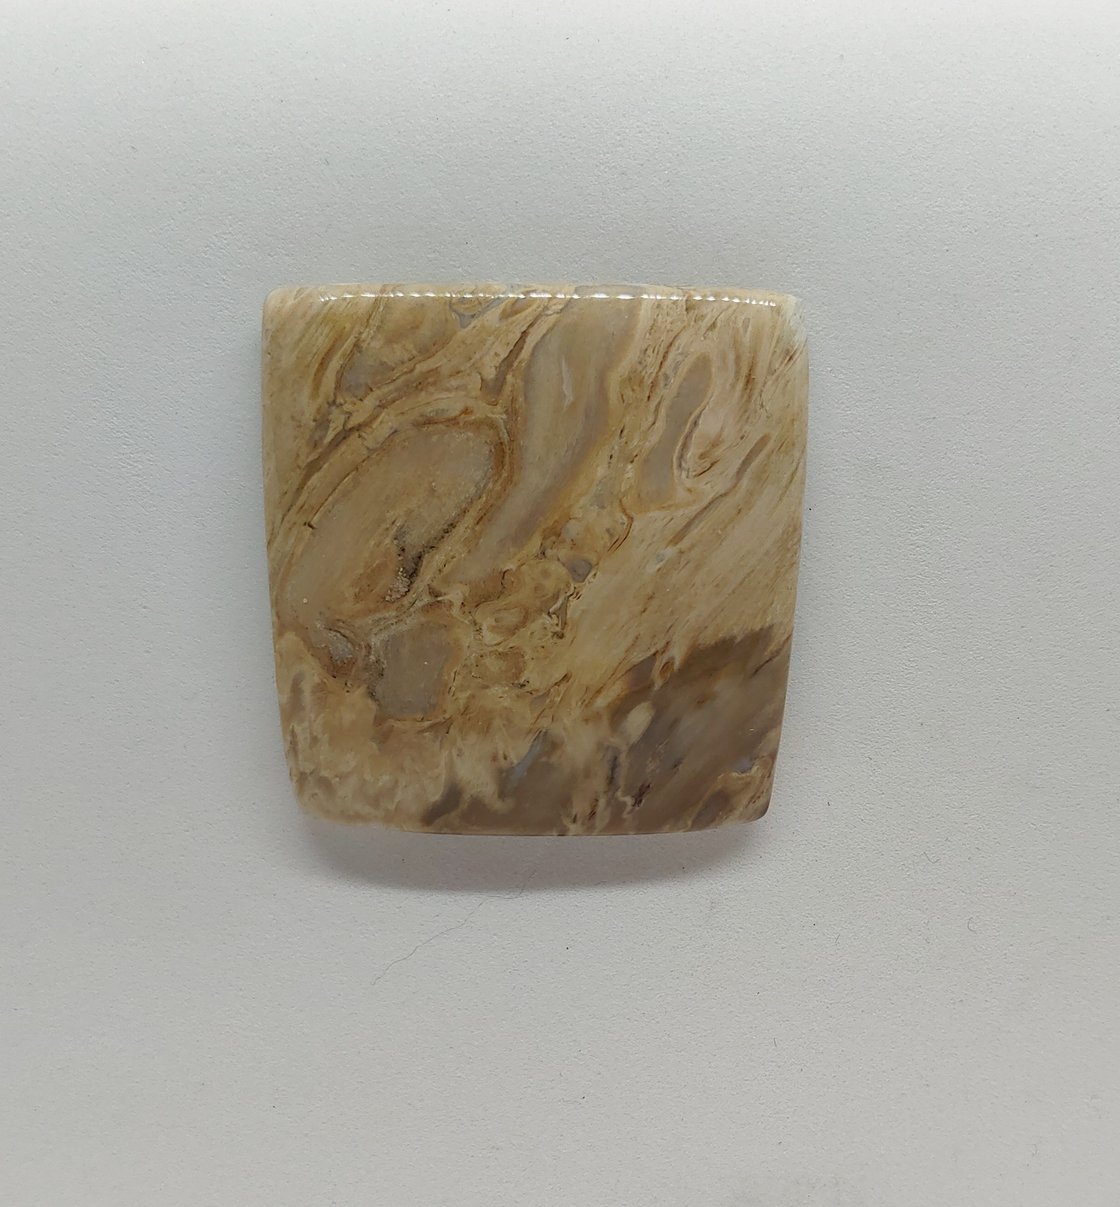 Image of Indonesian Fossil Magnetic Pin #21-521